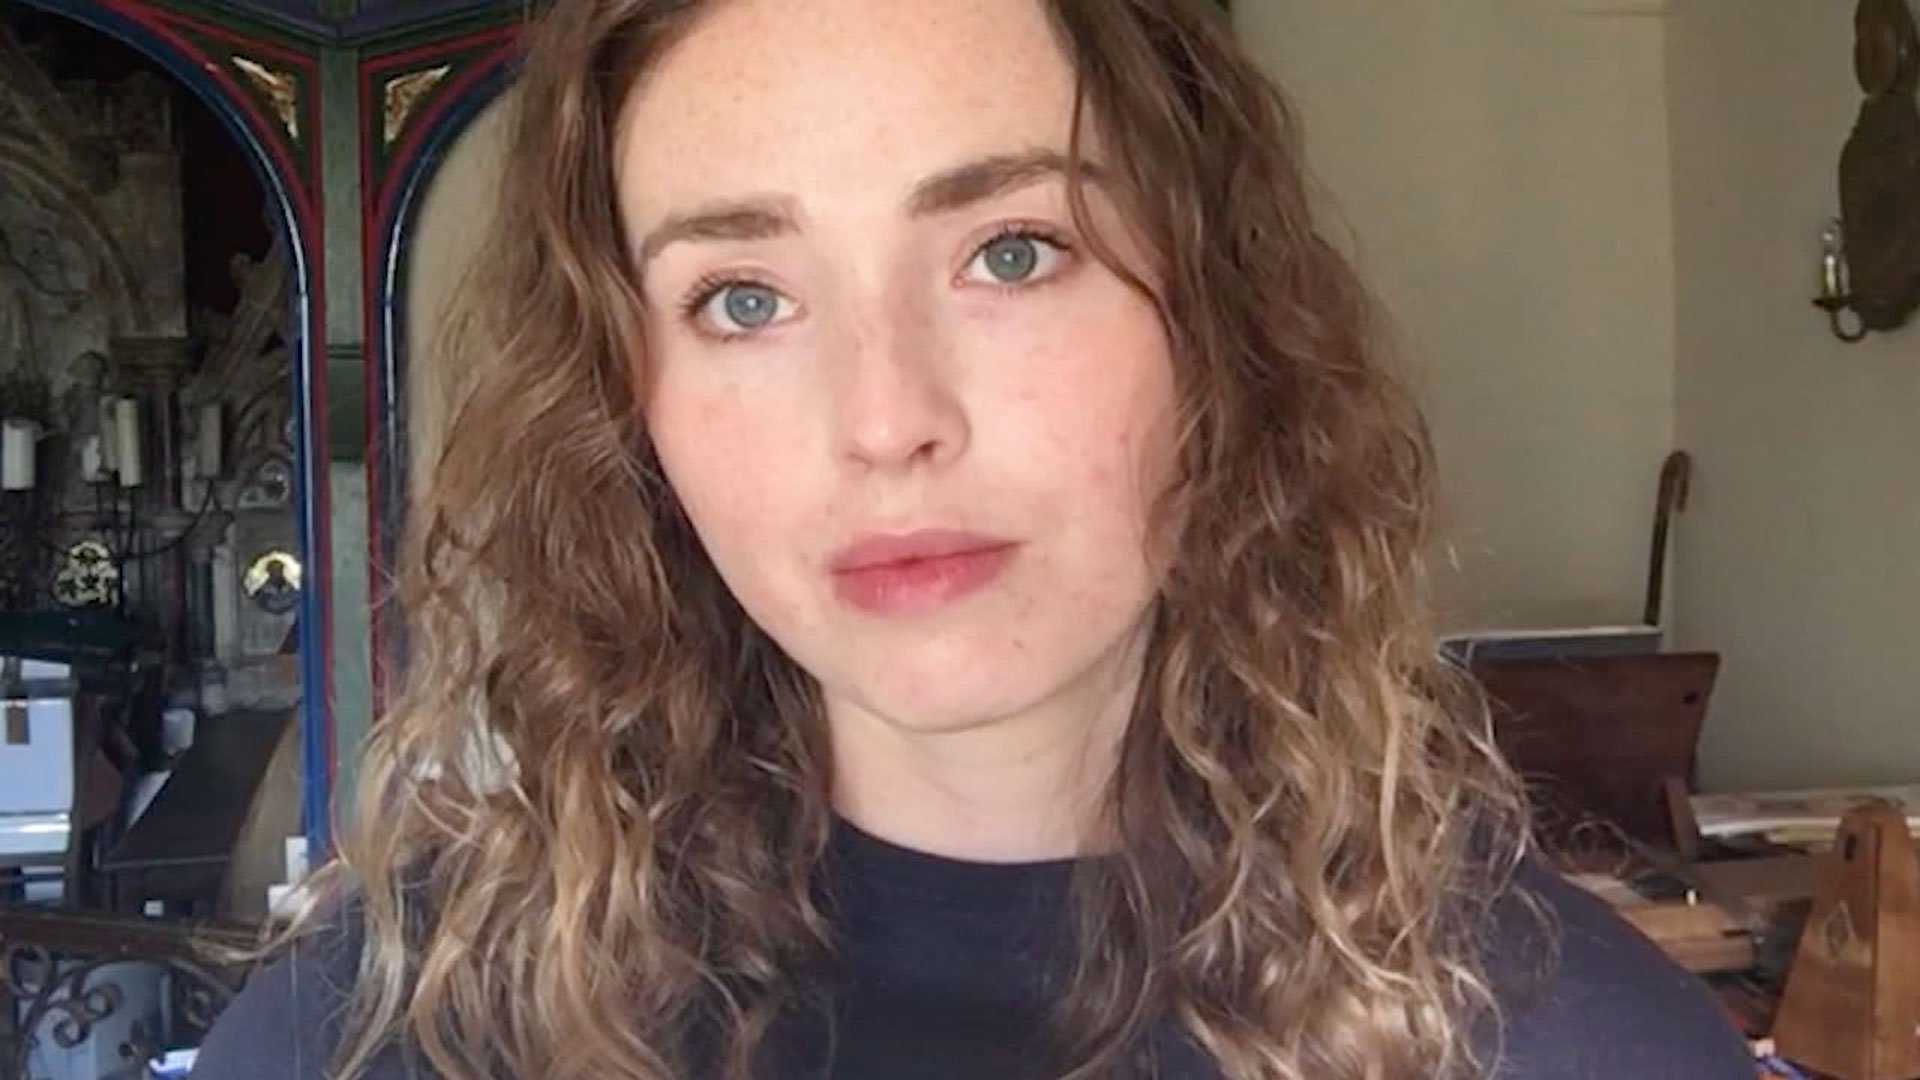 Skins star Freya Mavor pens letter 'to Earth' and admits 'I feel lost at sea'. The Big Issue